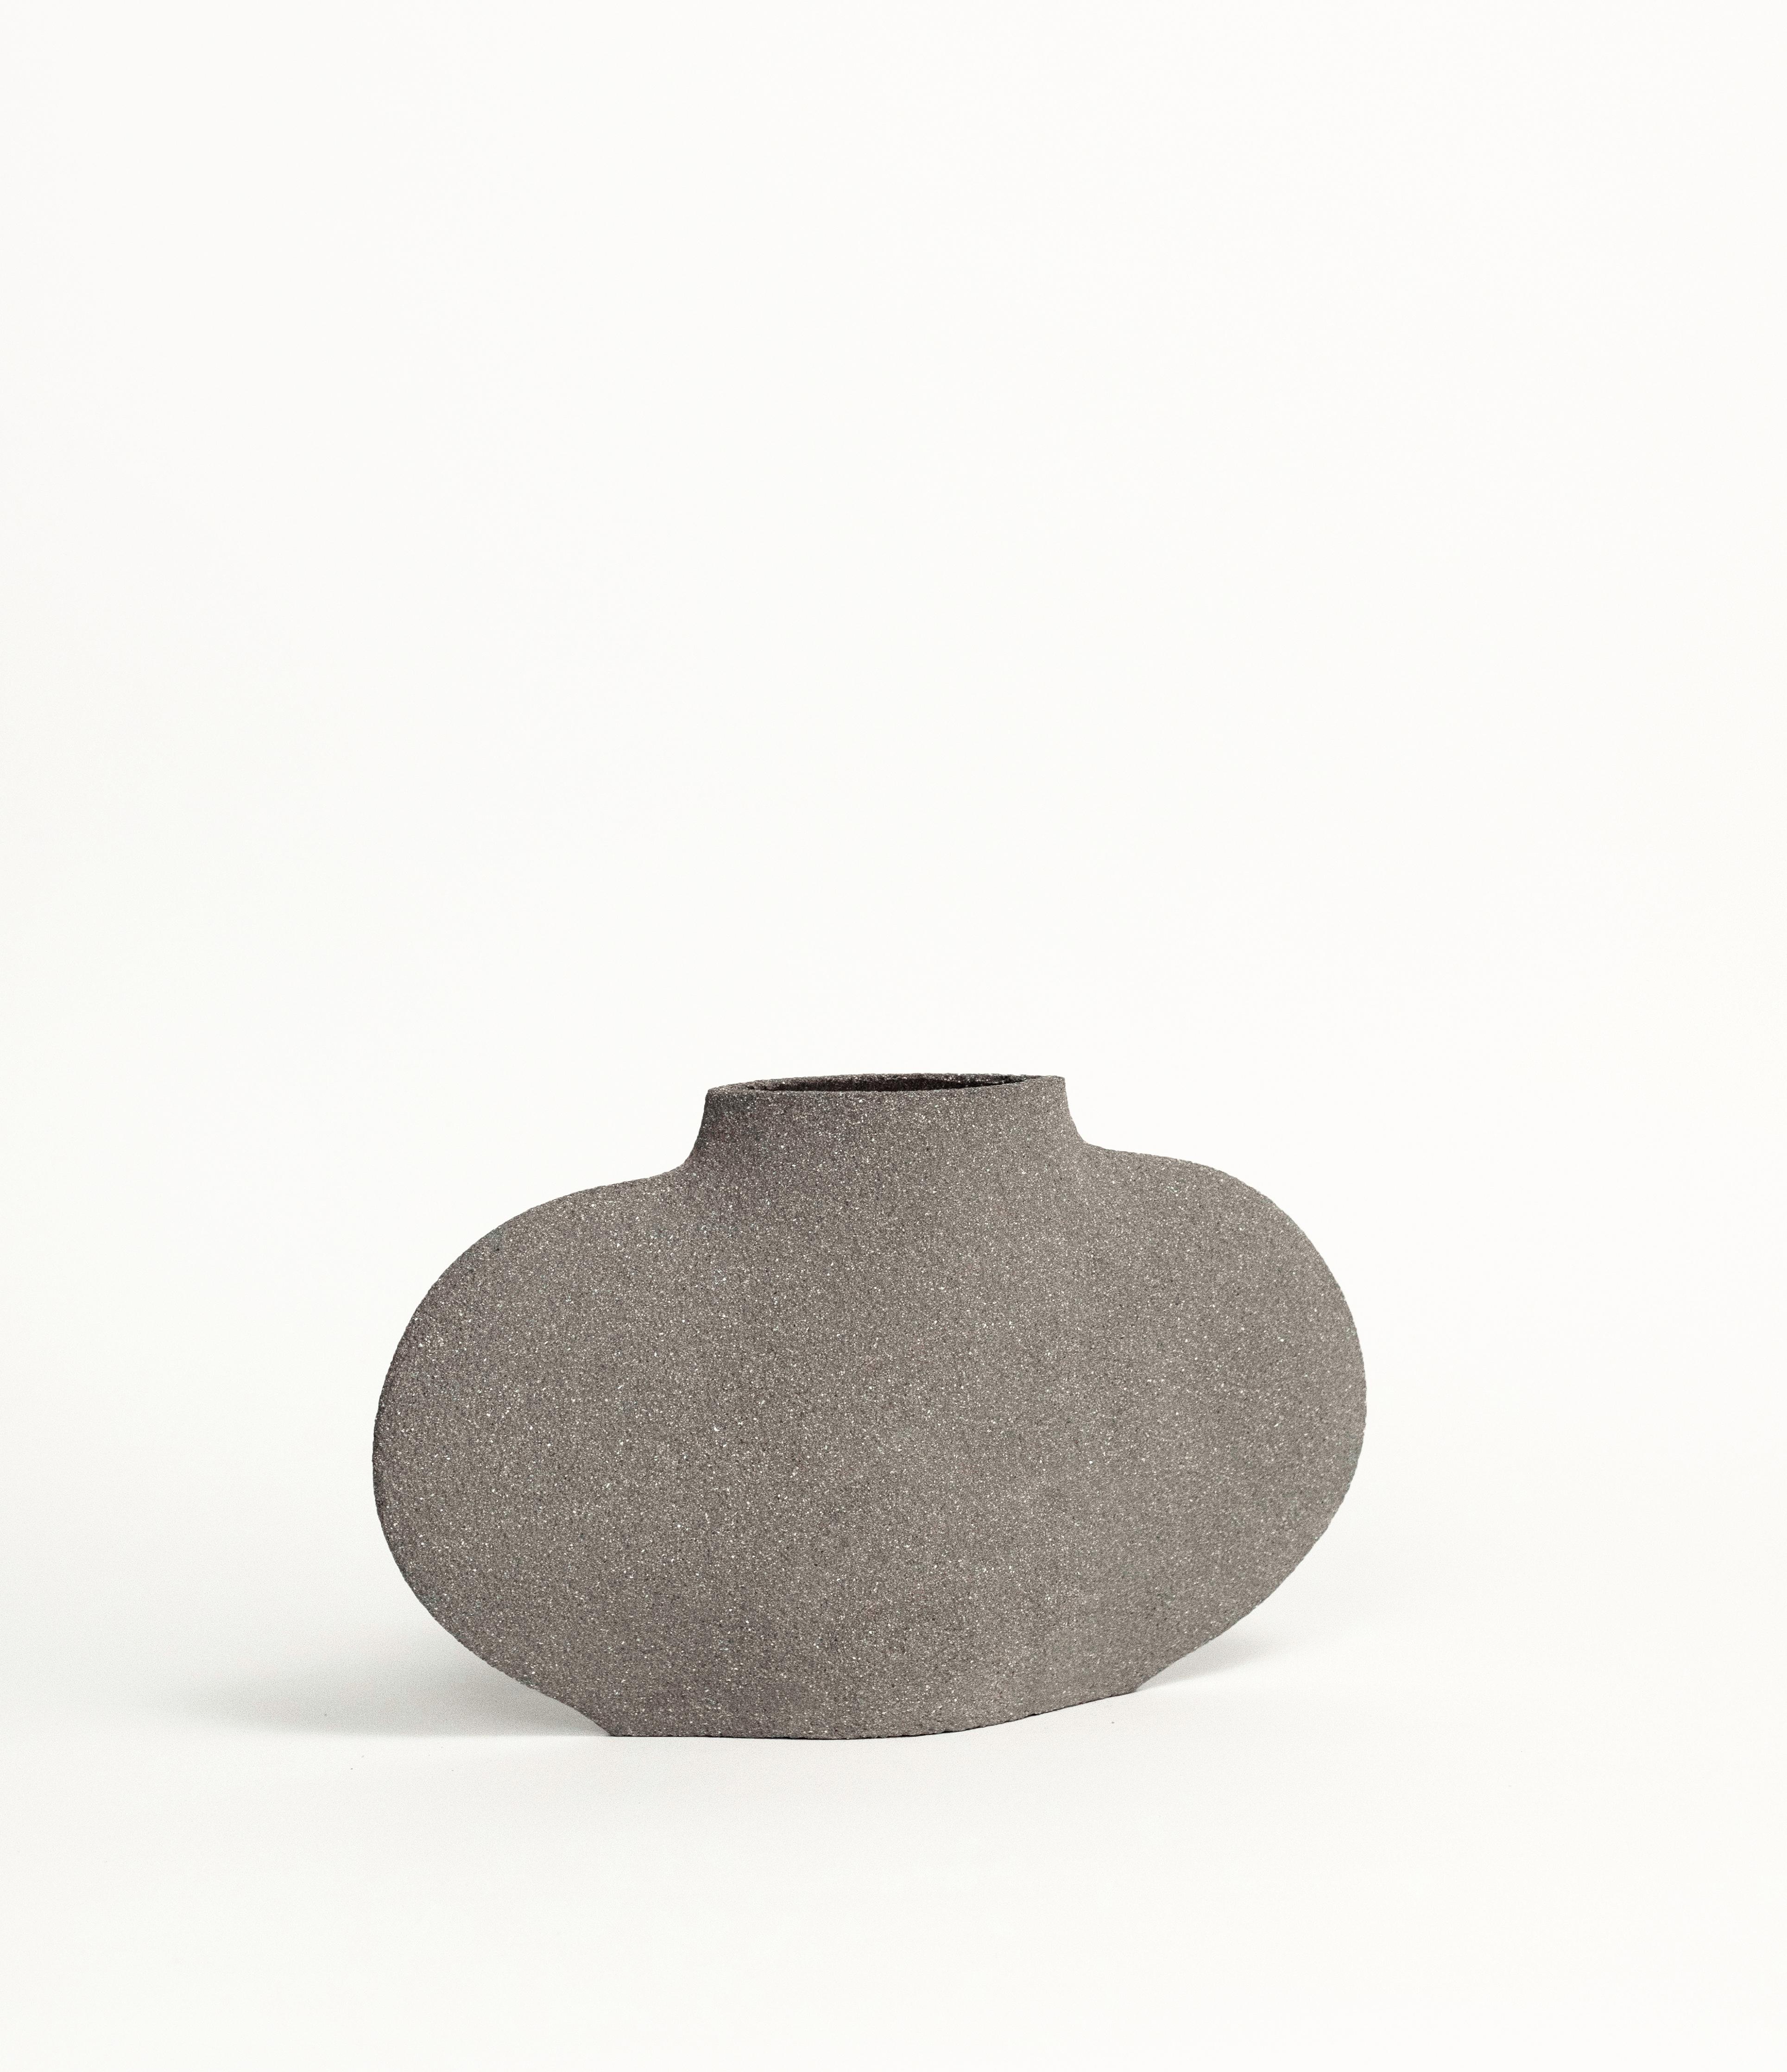 Ailes N°2 - Grey

Hand-crafted in our studio in France.

Measures: H: 14 CM / L: 24 CM
H: 5.5 INCH. / L: 9.5 INCH.

- Stoneware fired at high temperature finished with transparent glossy glaze inside.
- Raw exterior showcasing the natural